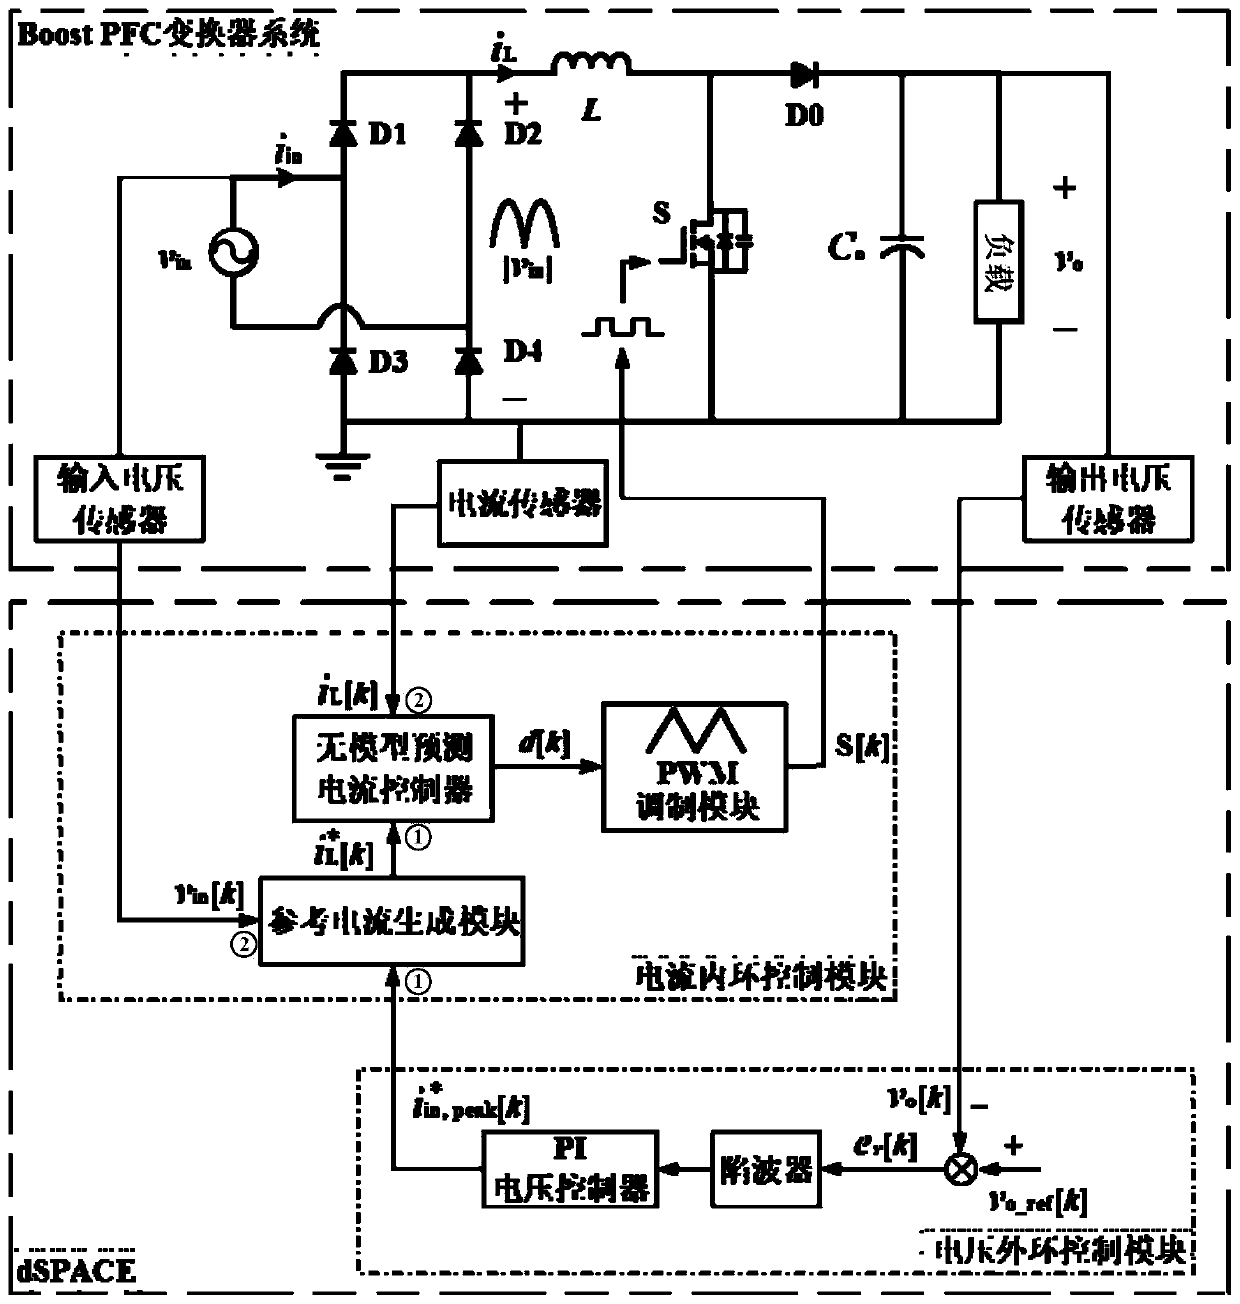 A model-free predictive current control system and control method for boost PFC converter